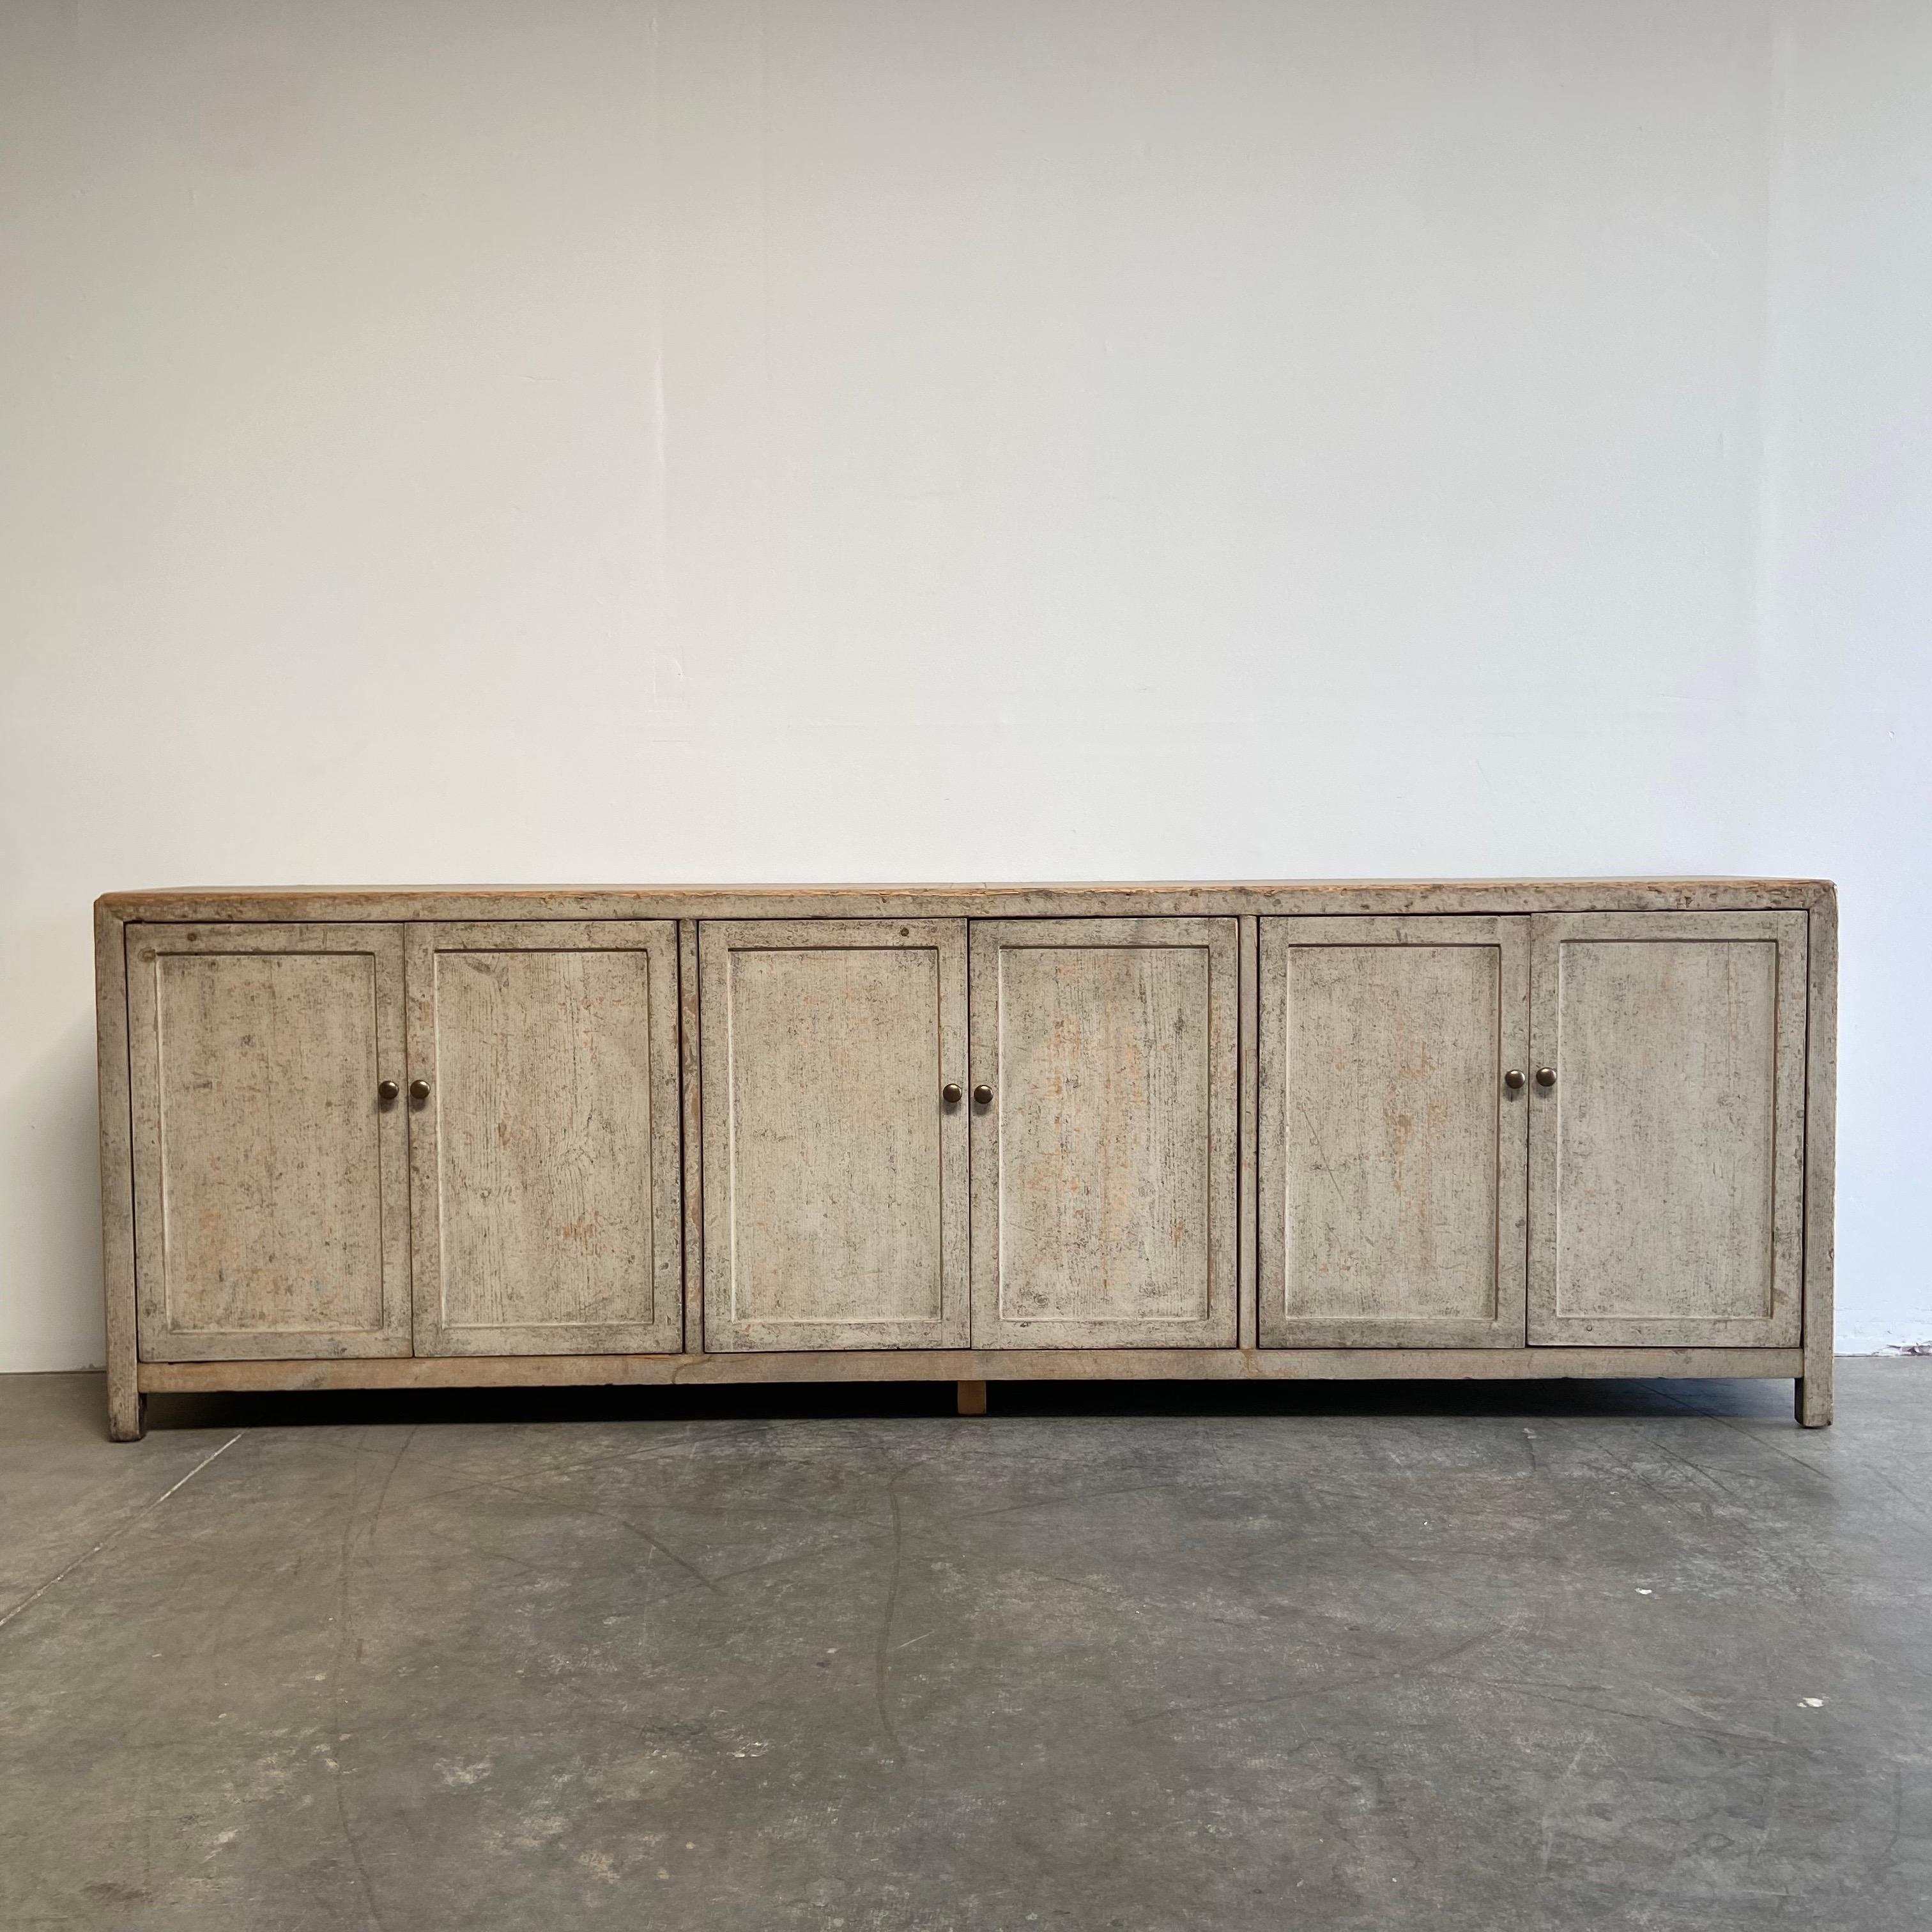 Custom Reclaimed wood sideboard
Size: 112-1/2” W x 18” D x 36” H
A distressed rustic painted finish in a natural linen color with subtle wood and greyish tones running through.
Plenty of storage, with doors, and a shelf behind each set of